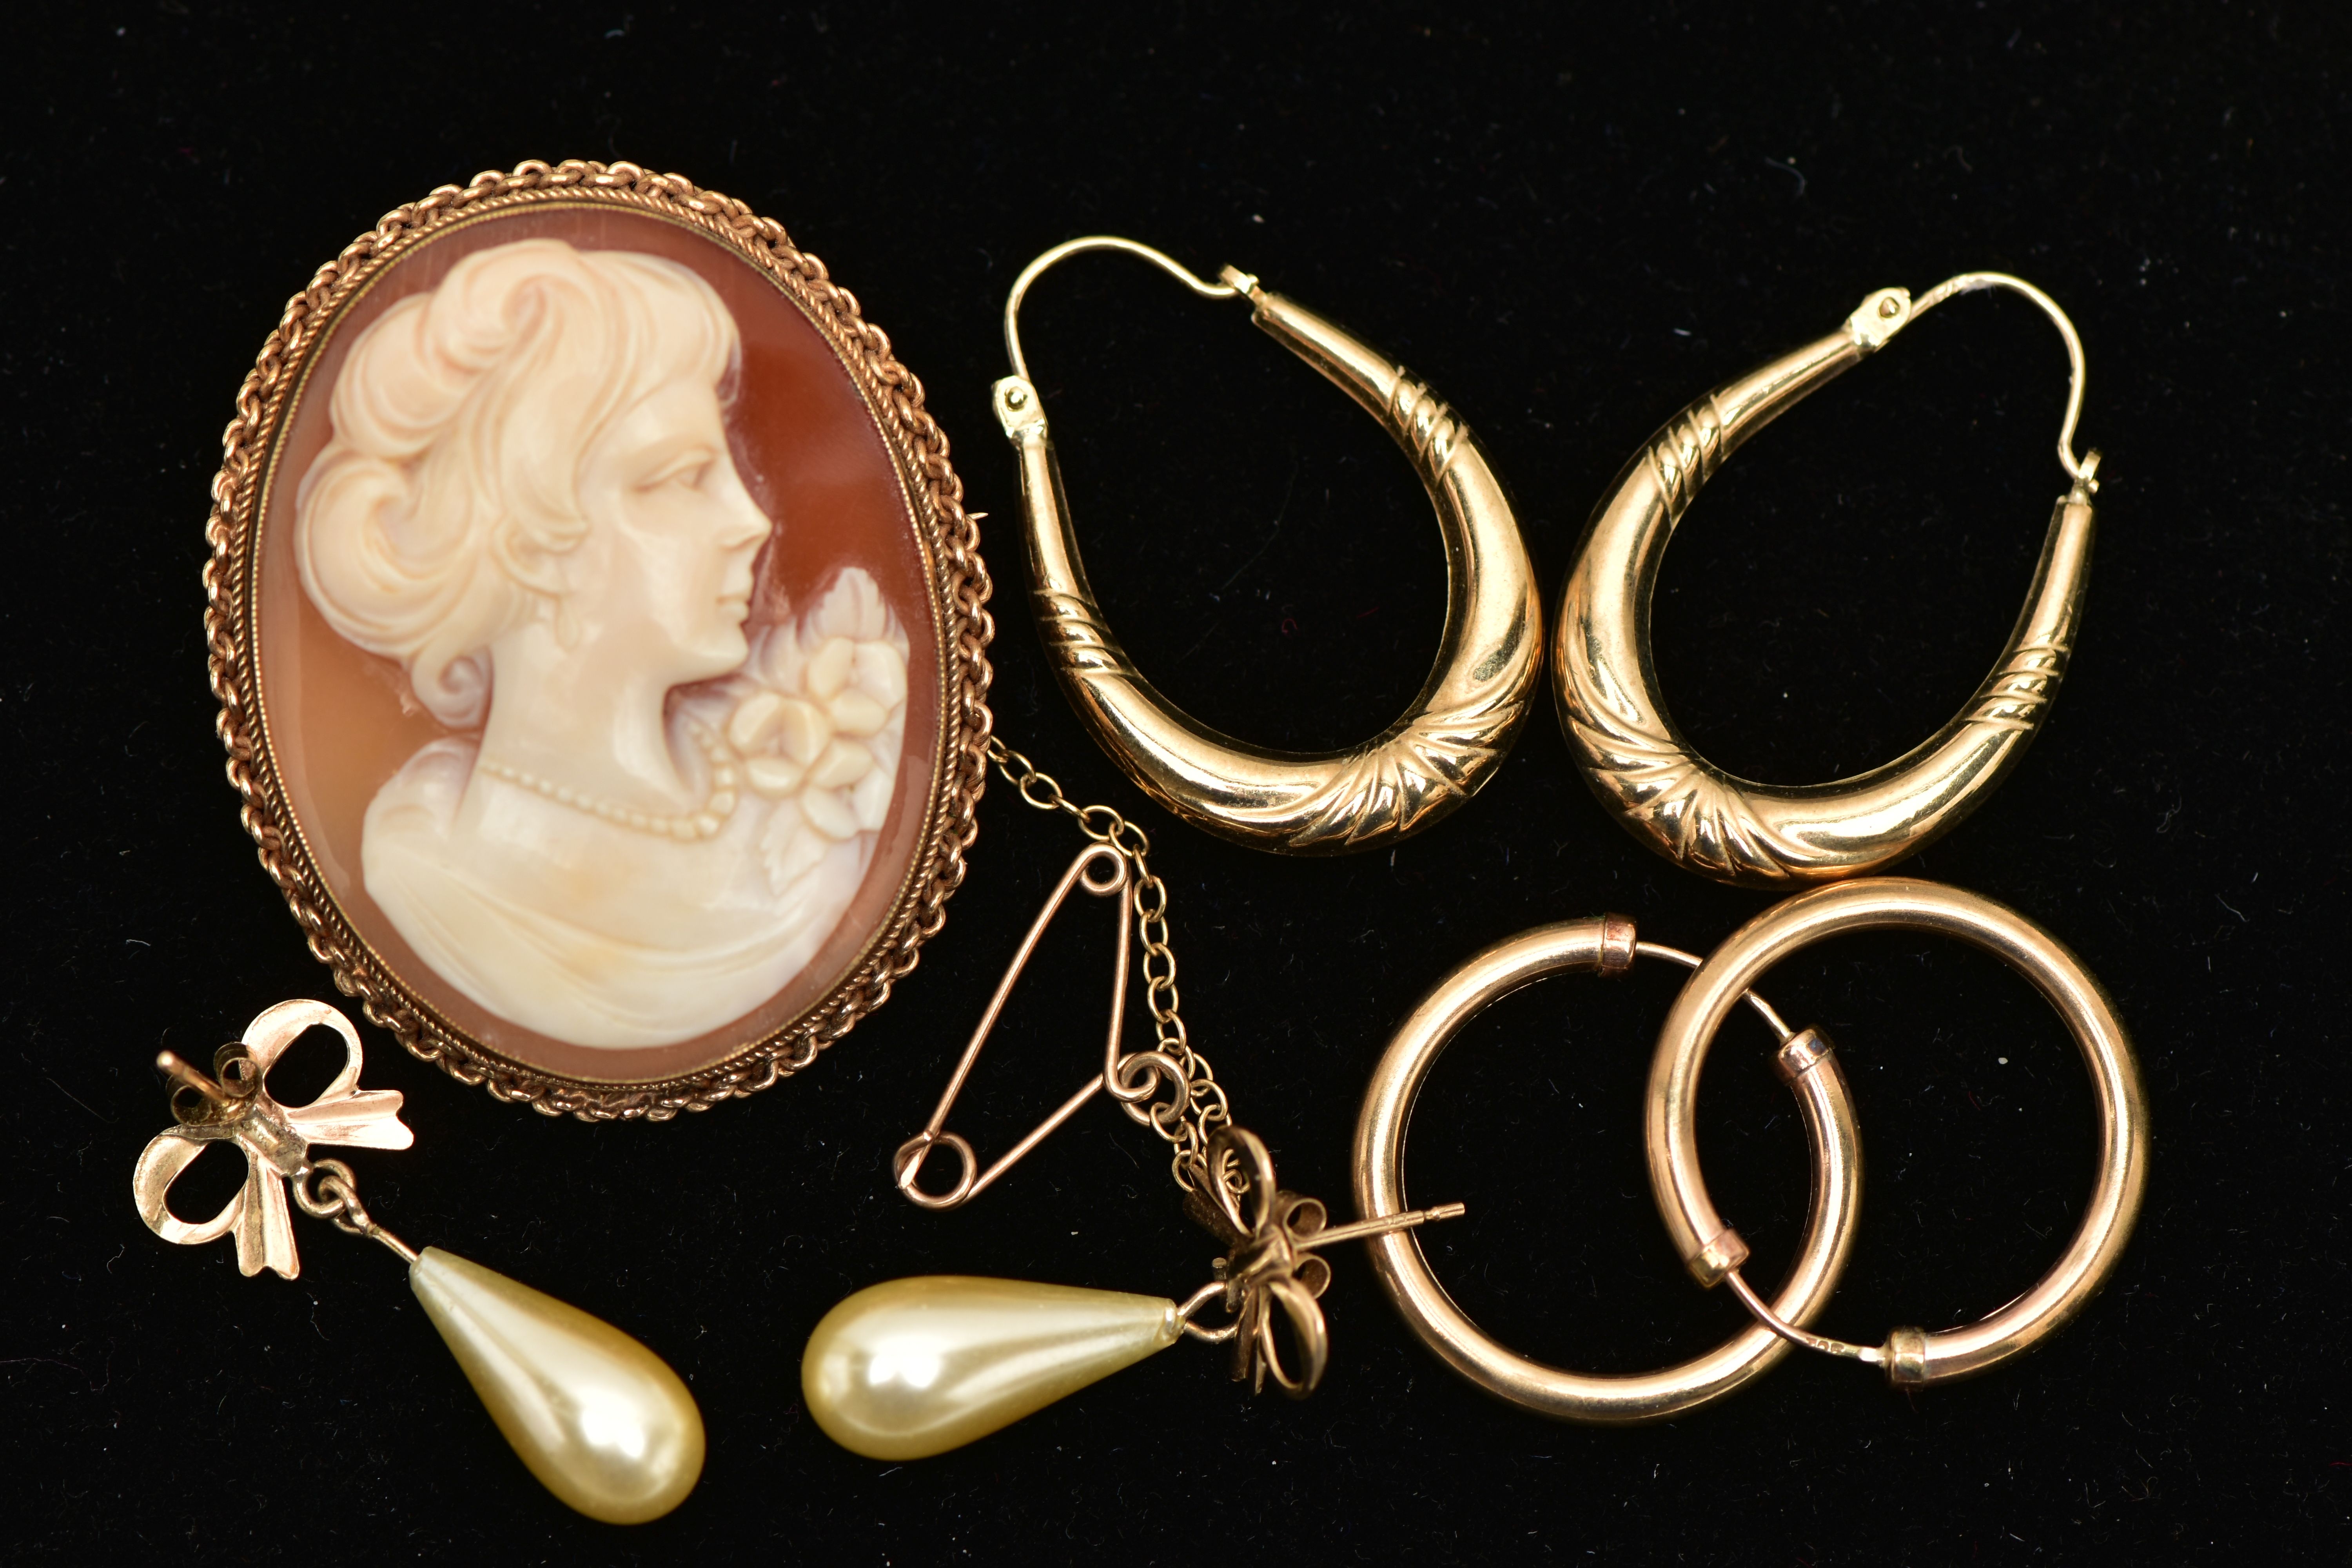 A 9CT GOLD CAMEO BROOCH AND THREE PAIRS OF EARRINGS, an oval carved shell cameo depicting a lady - Image 4 of 4